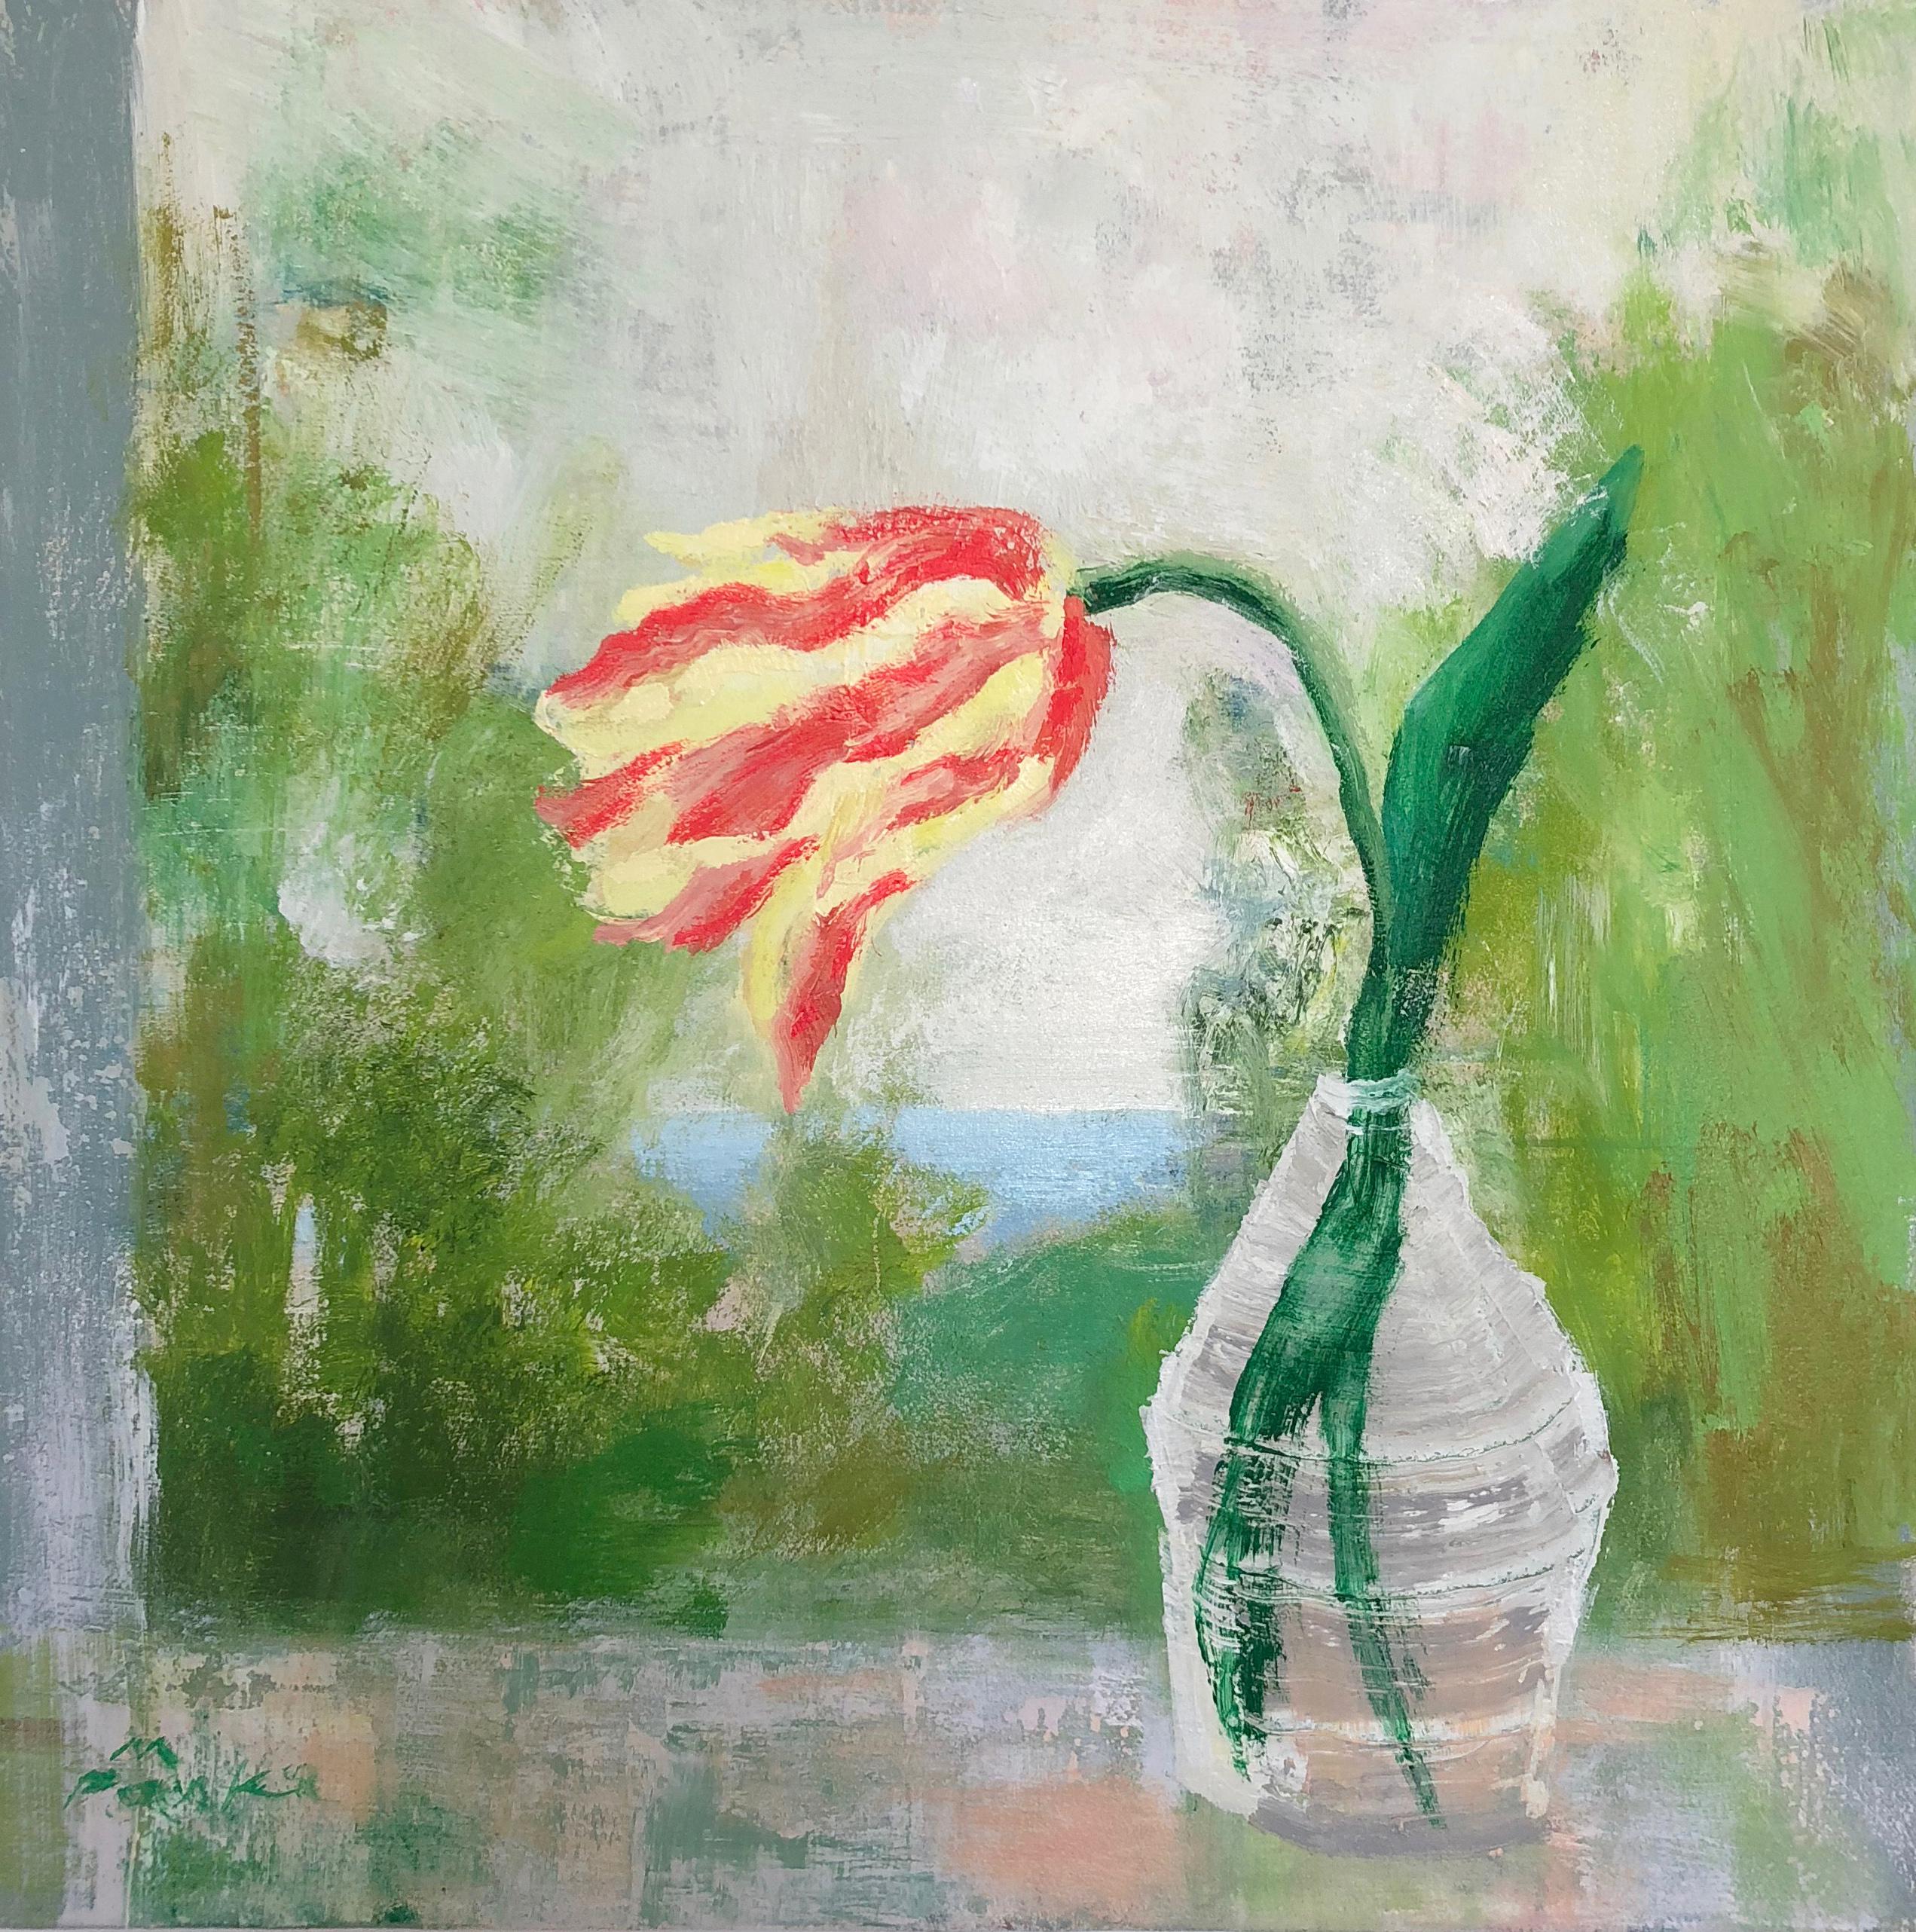 Melanie Parke infuses her impressionist still lifes with a hint of modernism, pairing down her subject to a collection of vibrant colors and energies. A play between interior and exterior, nature run rampant, and a single trimmed flower in a vase,